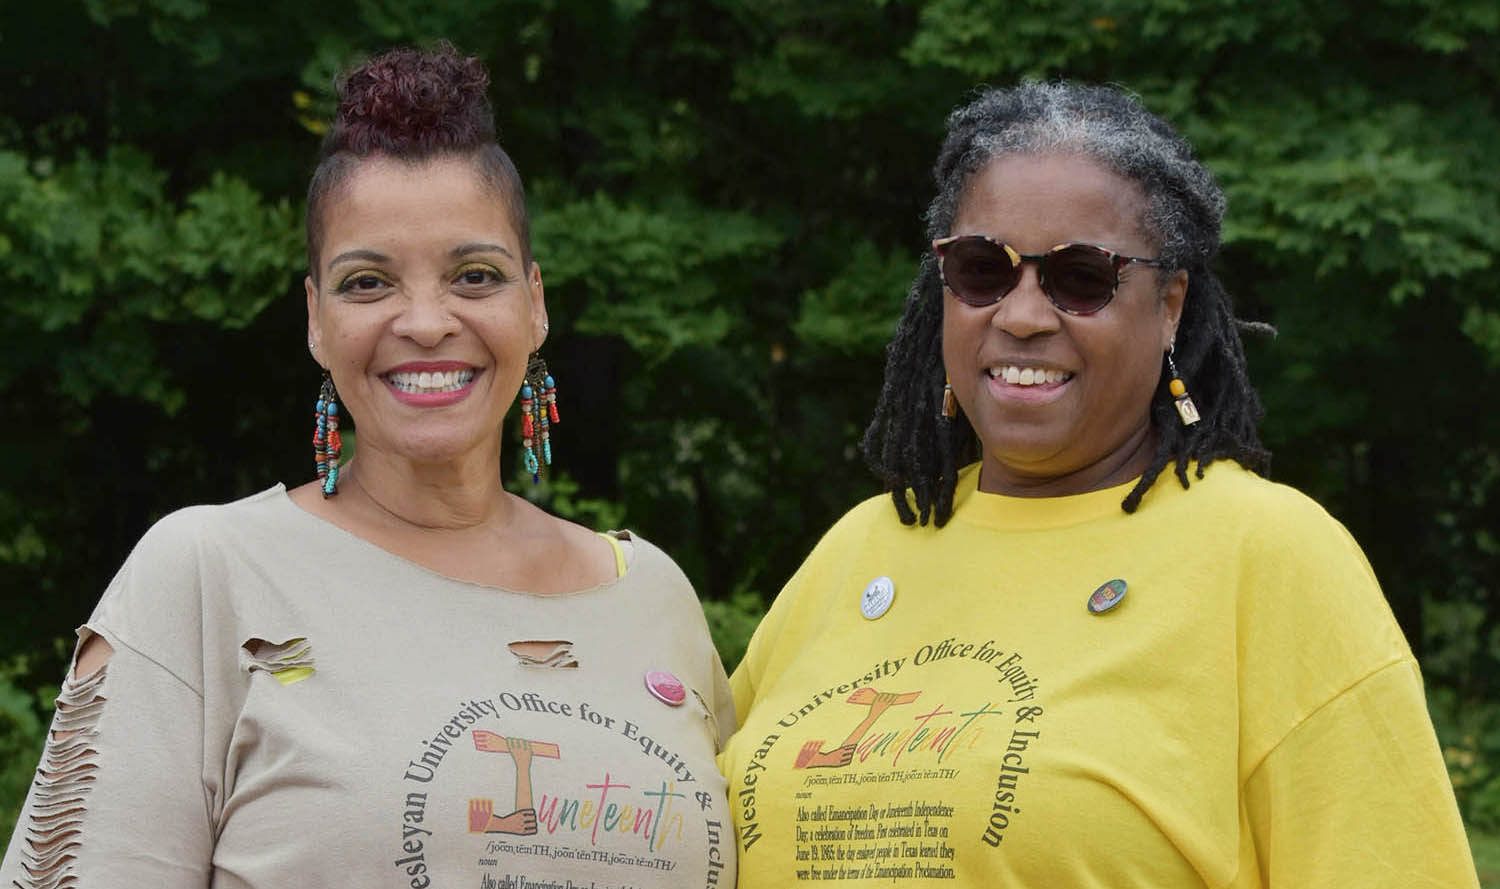 Evelyn Bozeman, administrative assistant for the Office for Equity and Inclusion, and Alison Williams '81, vice president for equity and inclusion, proudly display their Juneteenth signs during the City of Middletown's Juneteenth Liberation.